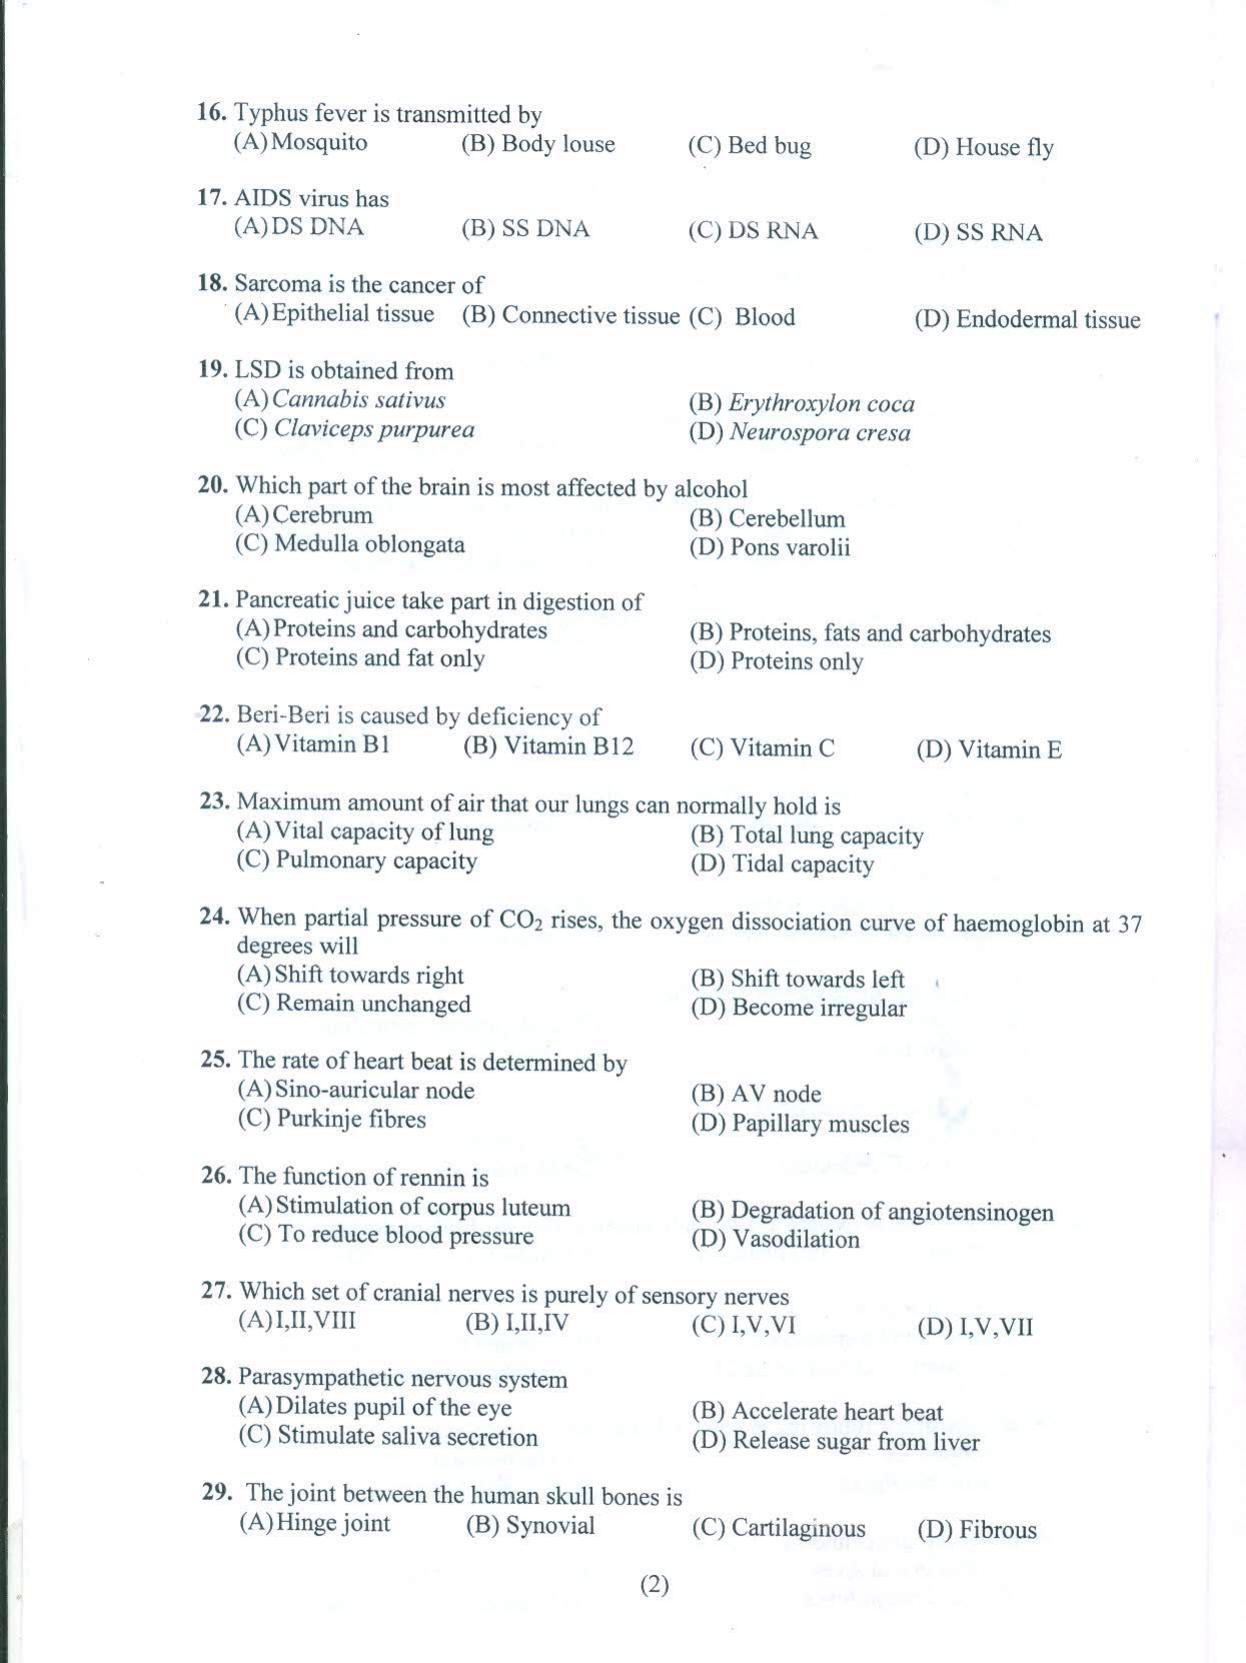 PUCET UG 2021 Biology Question Paper - Page 3